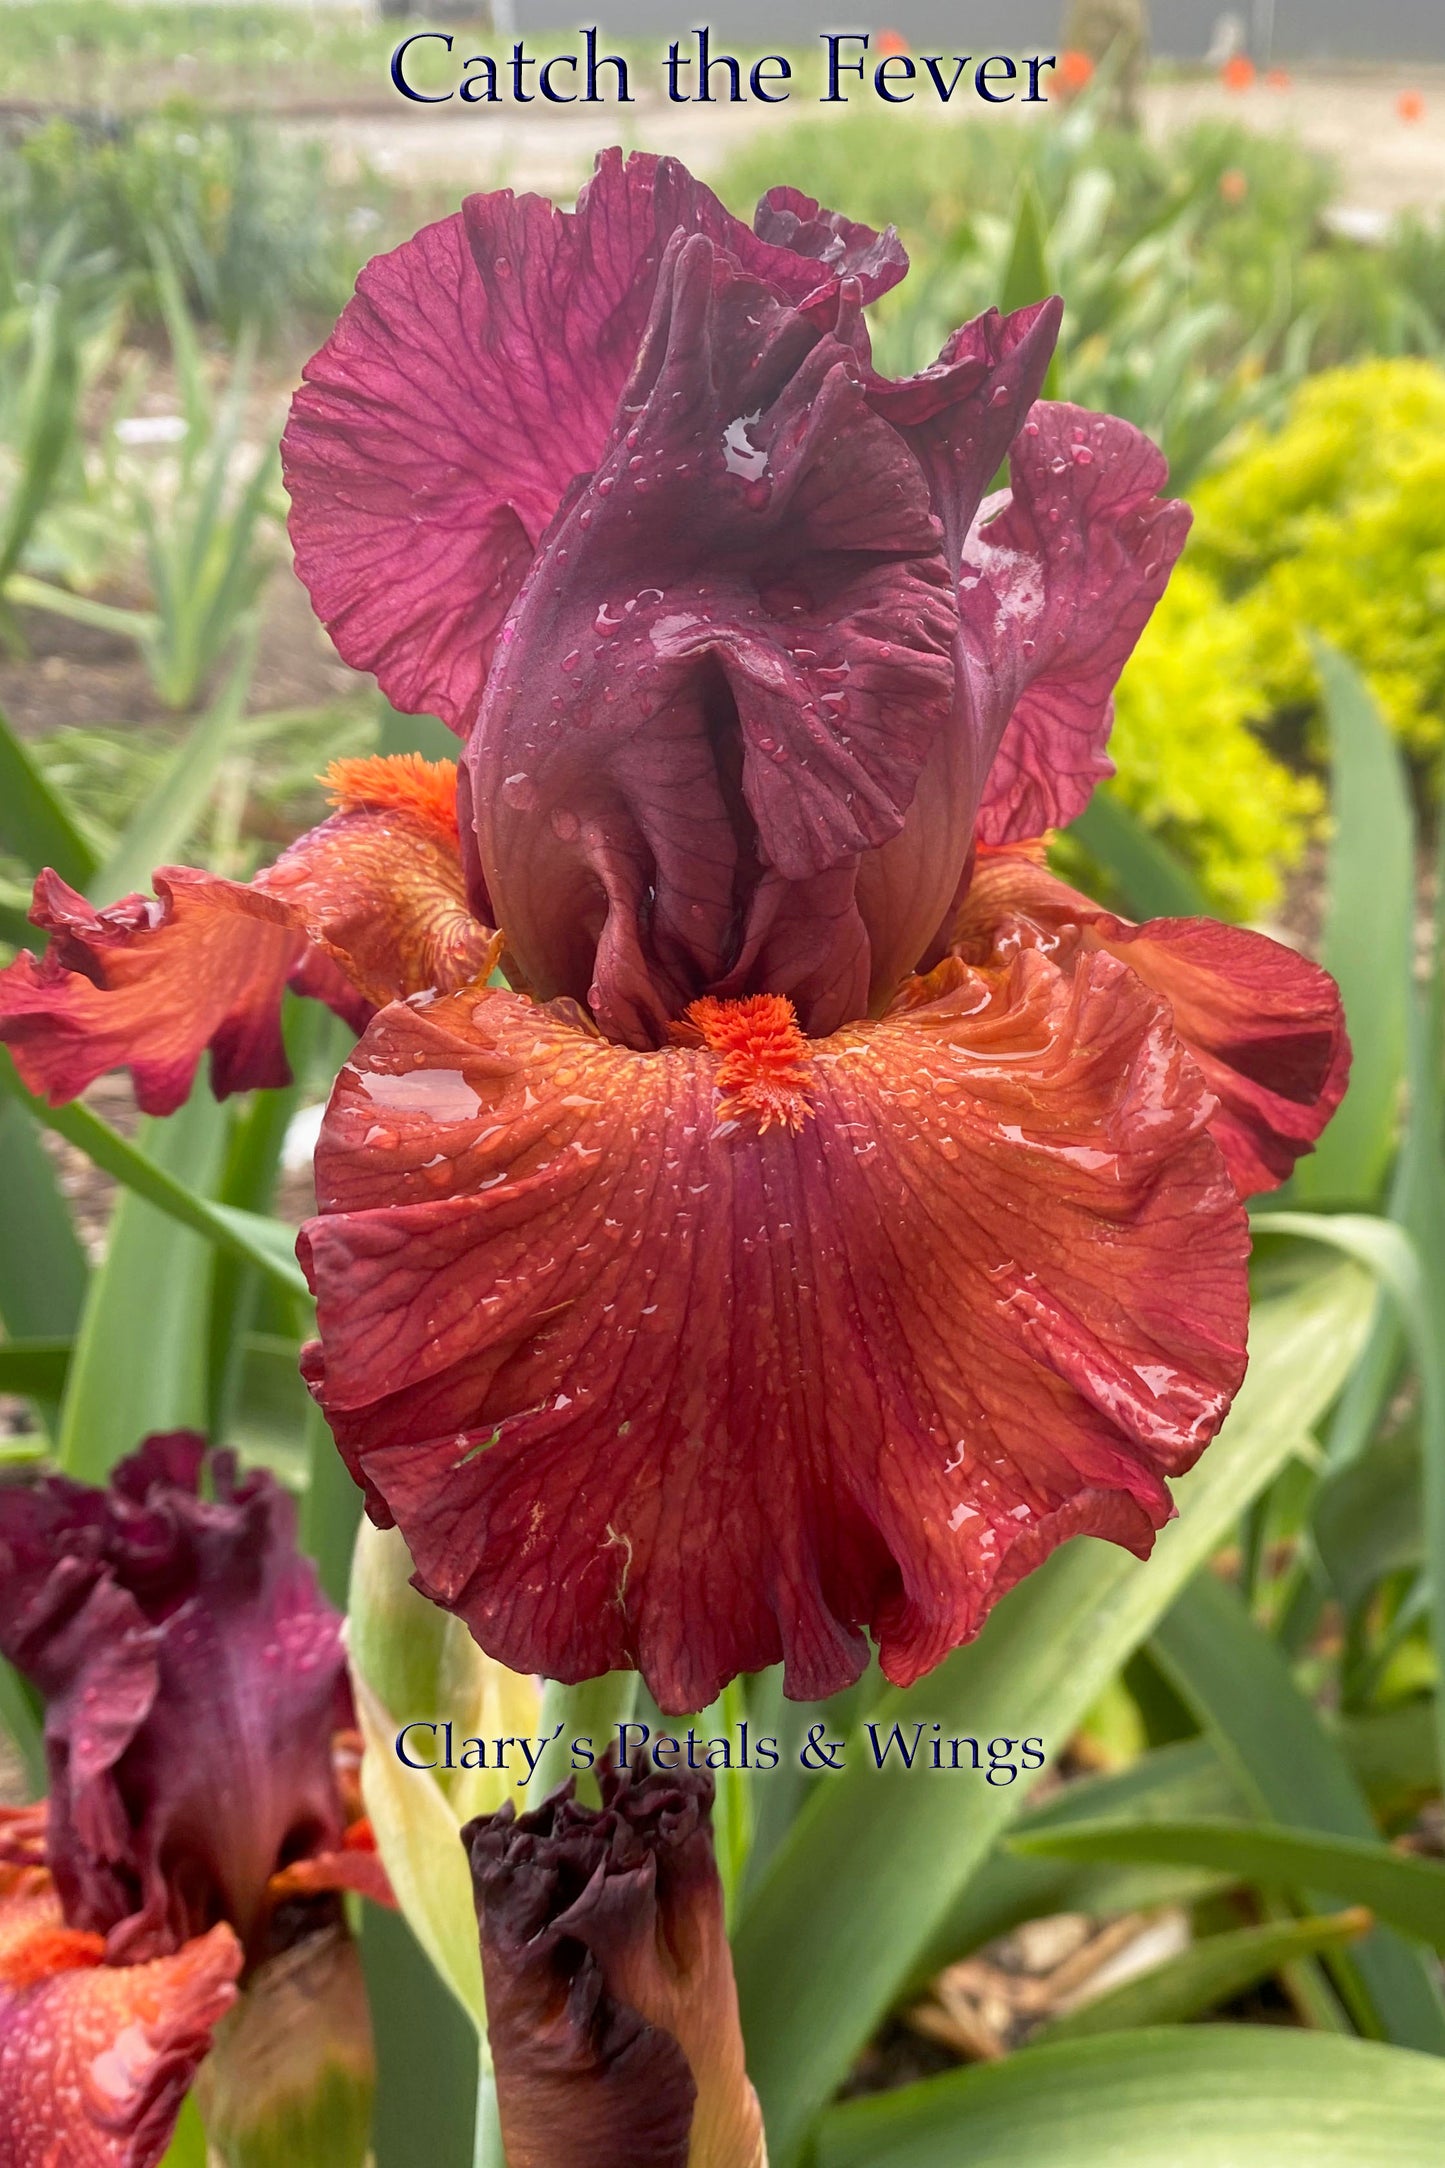 Catch the Fever - Tall Bearded Iris